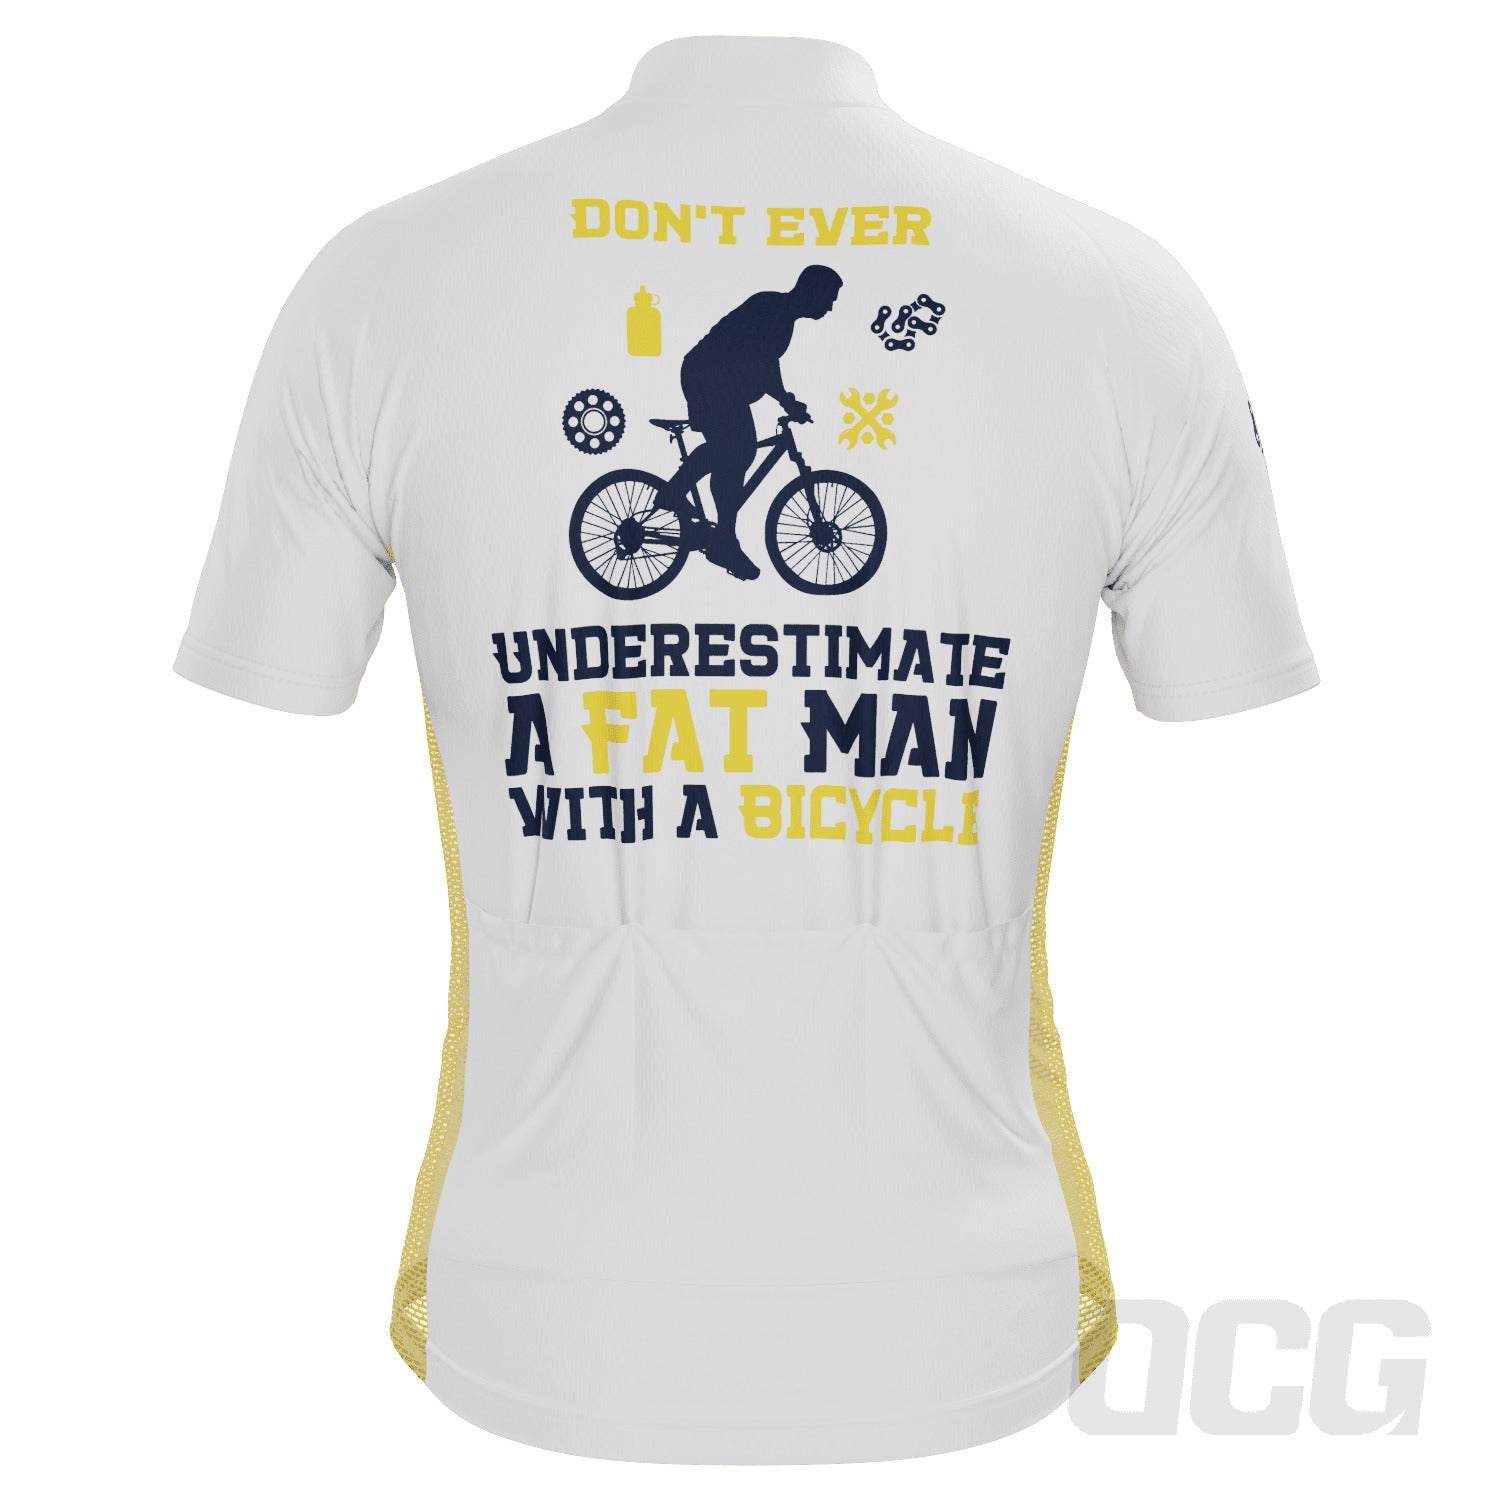 Men's Don't Ever Underestimate a Fat Man Short Sleeve Cycling Jersey